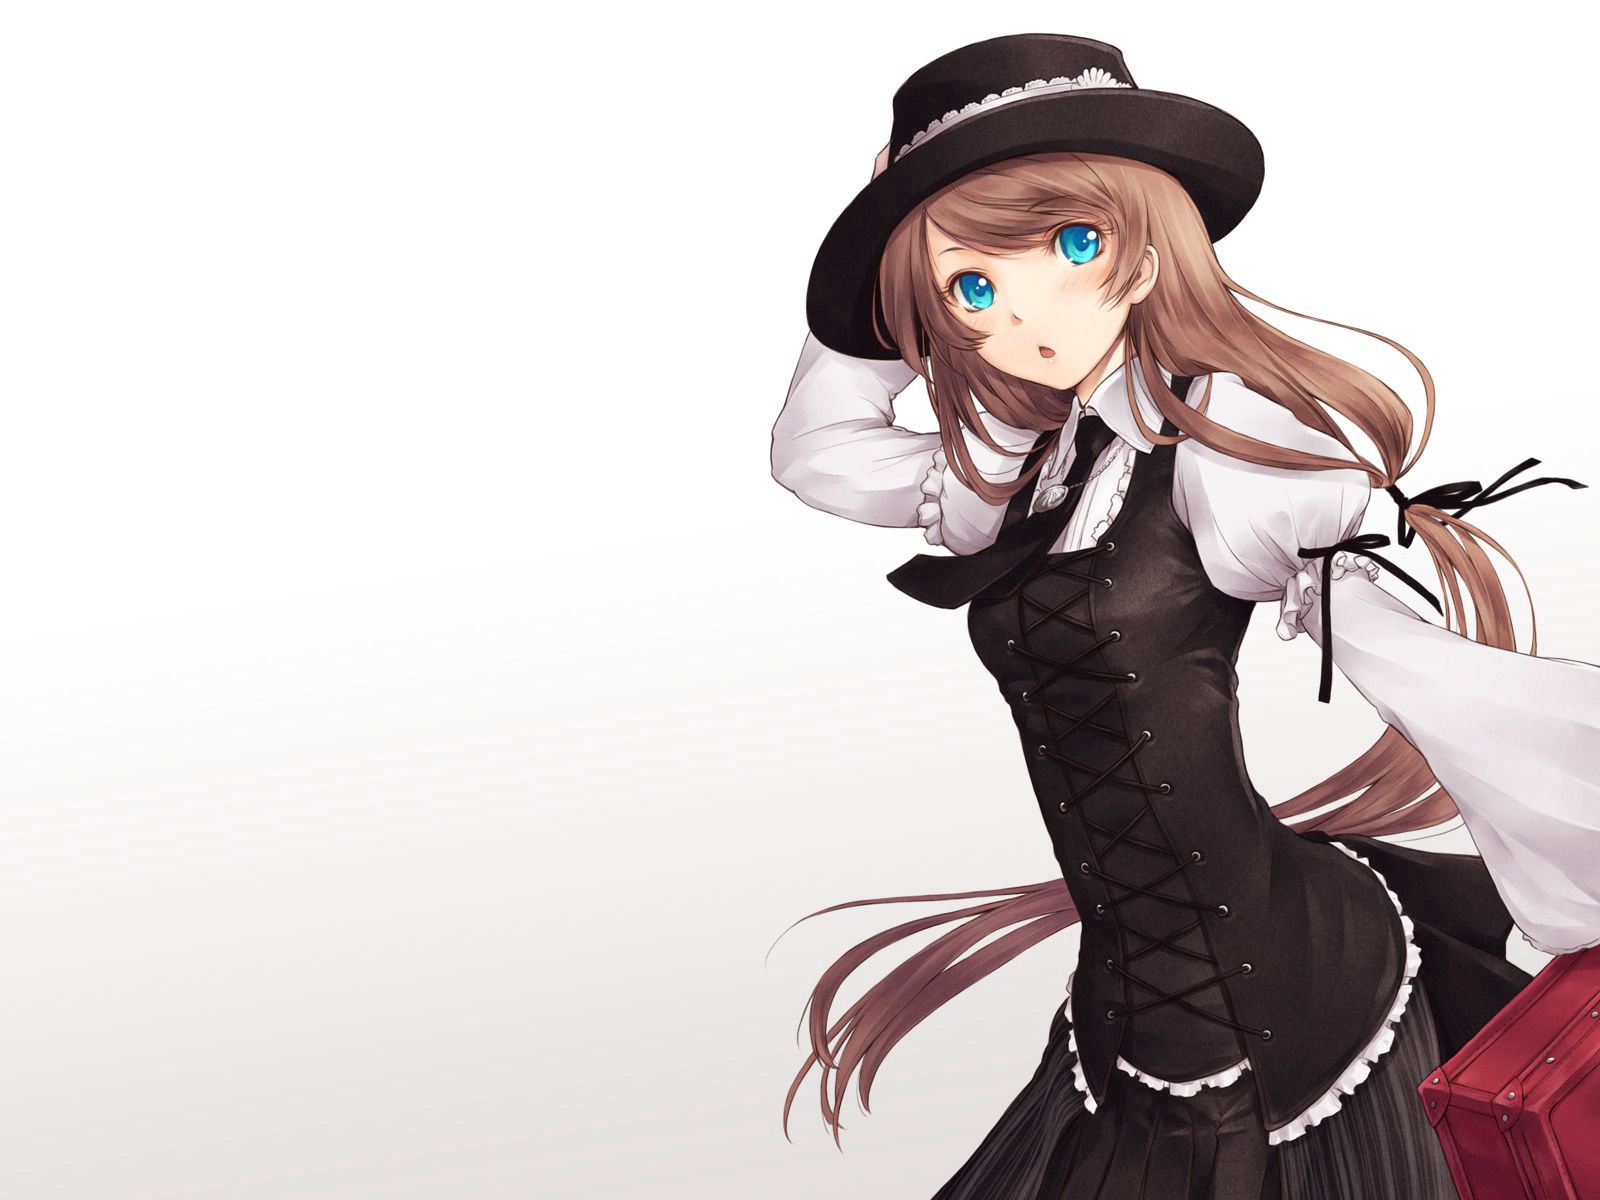 girl, brunette, anime, hat, tie, suitcase High Definition image